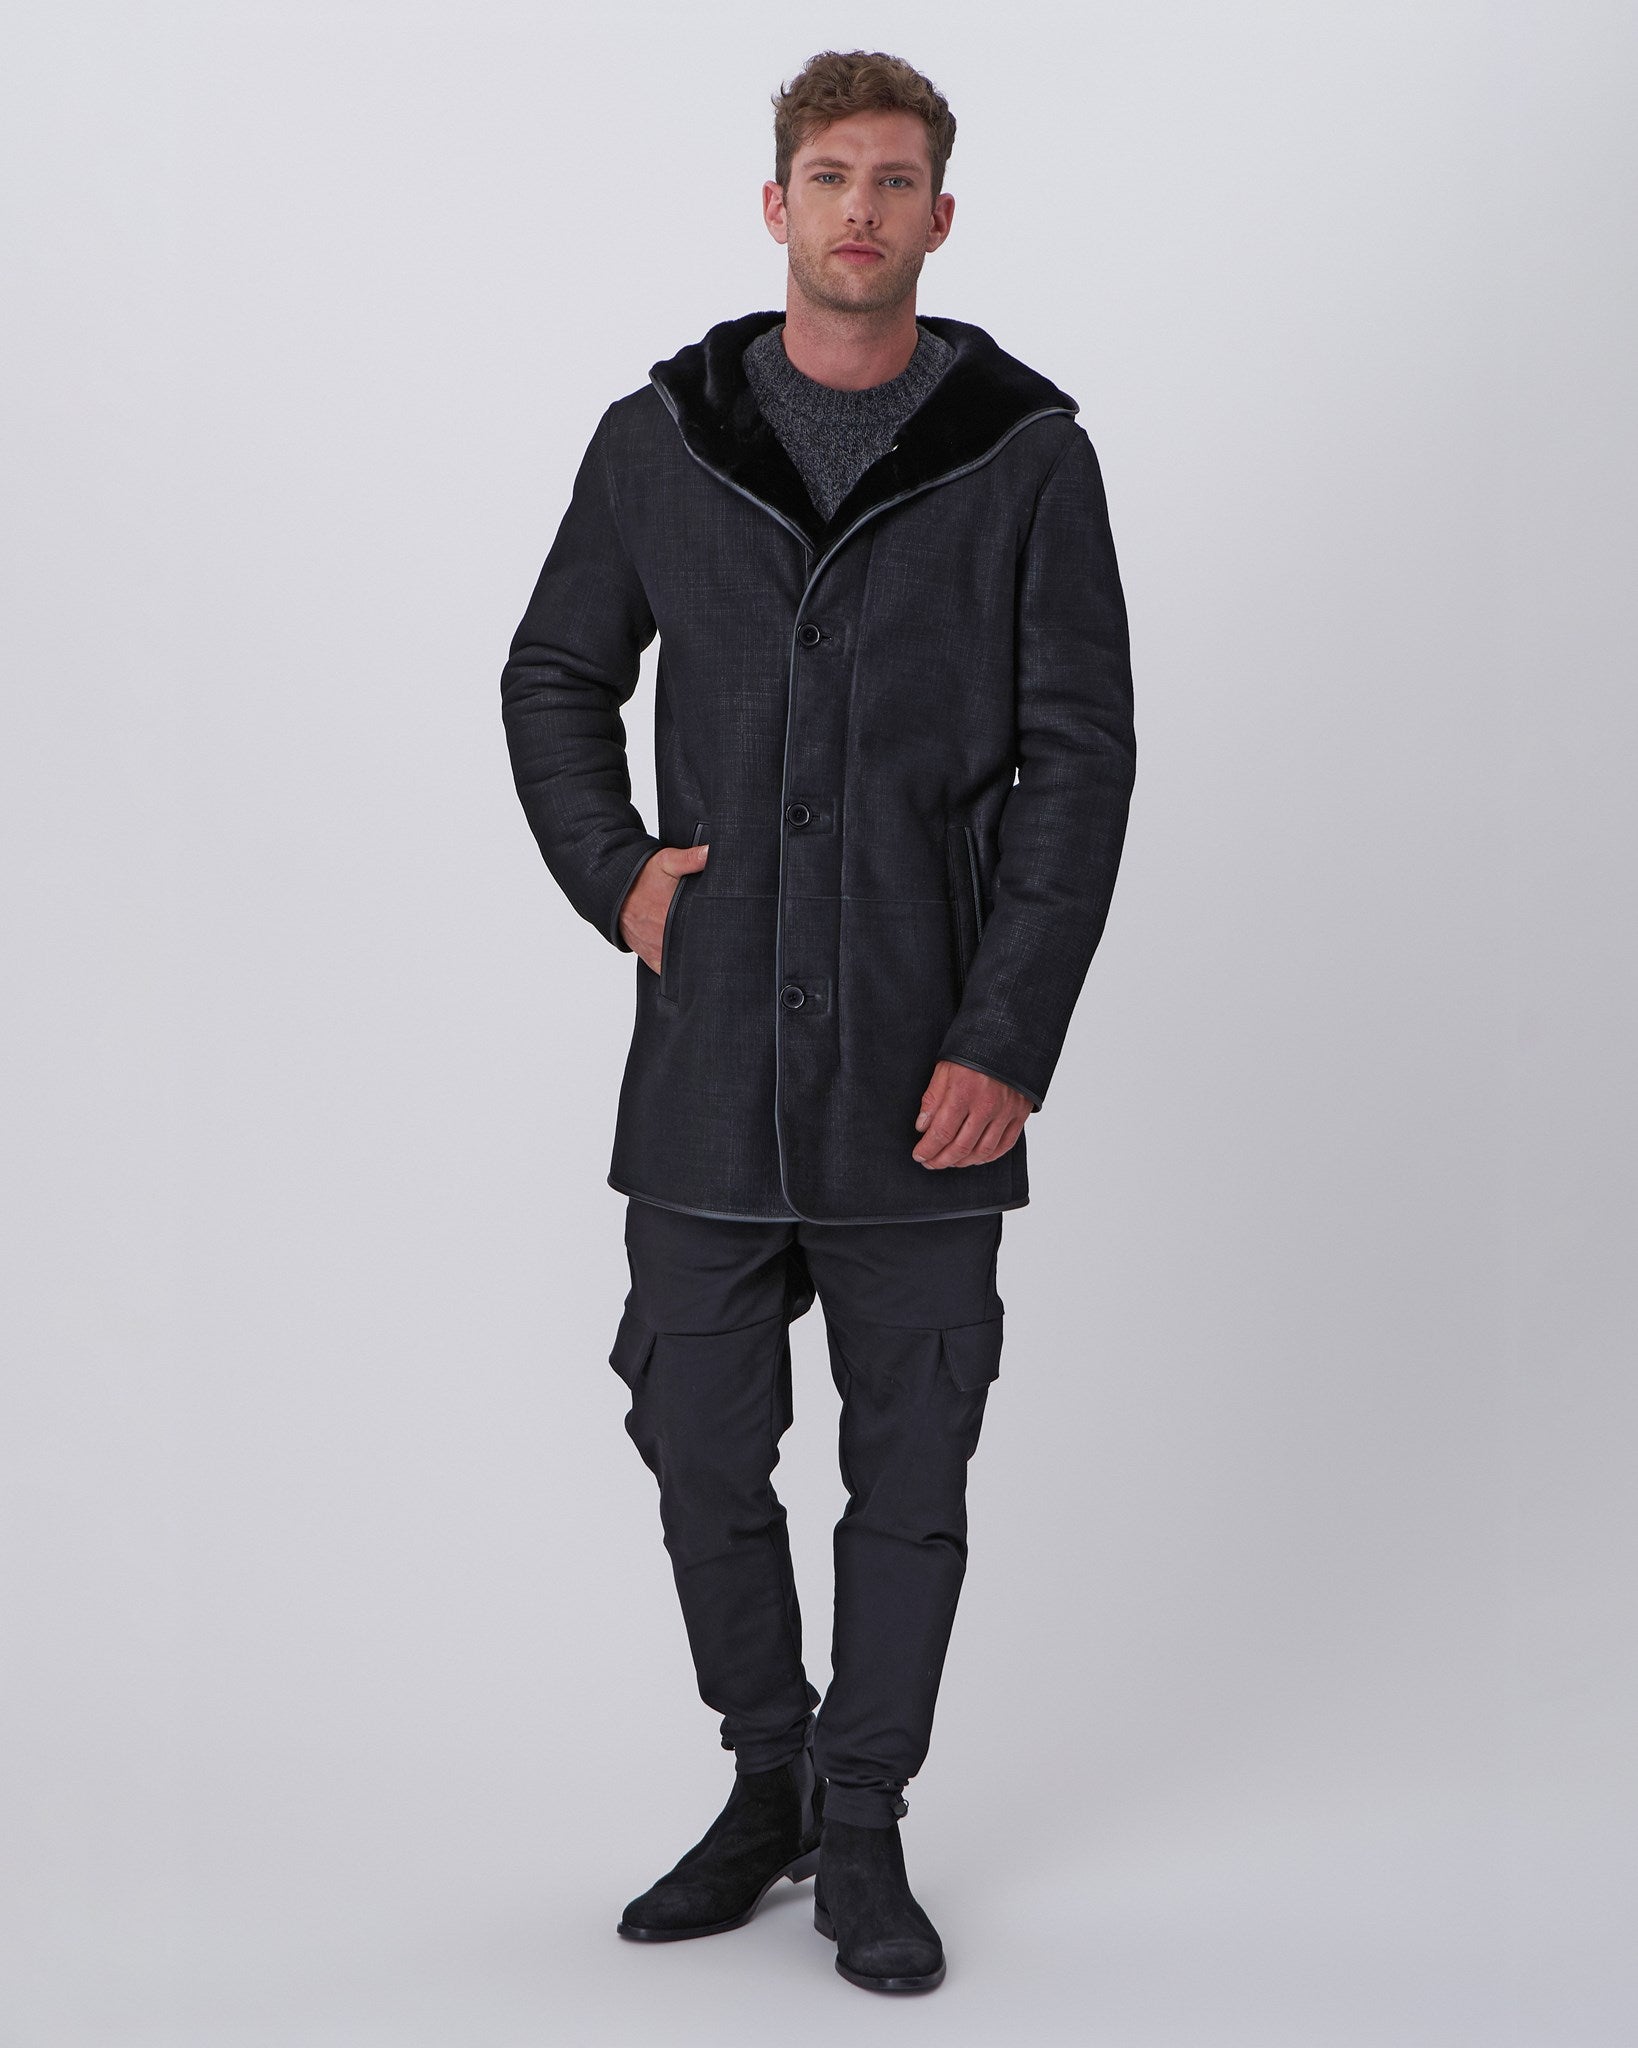 Men Outerwear Jackets & Coats Shearling Collection - Gorski Montreal